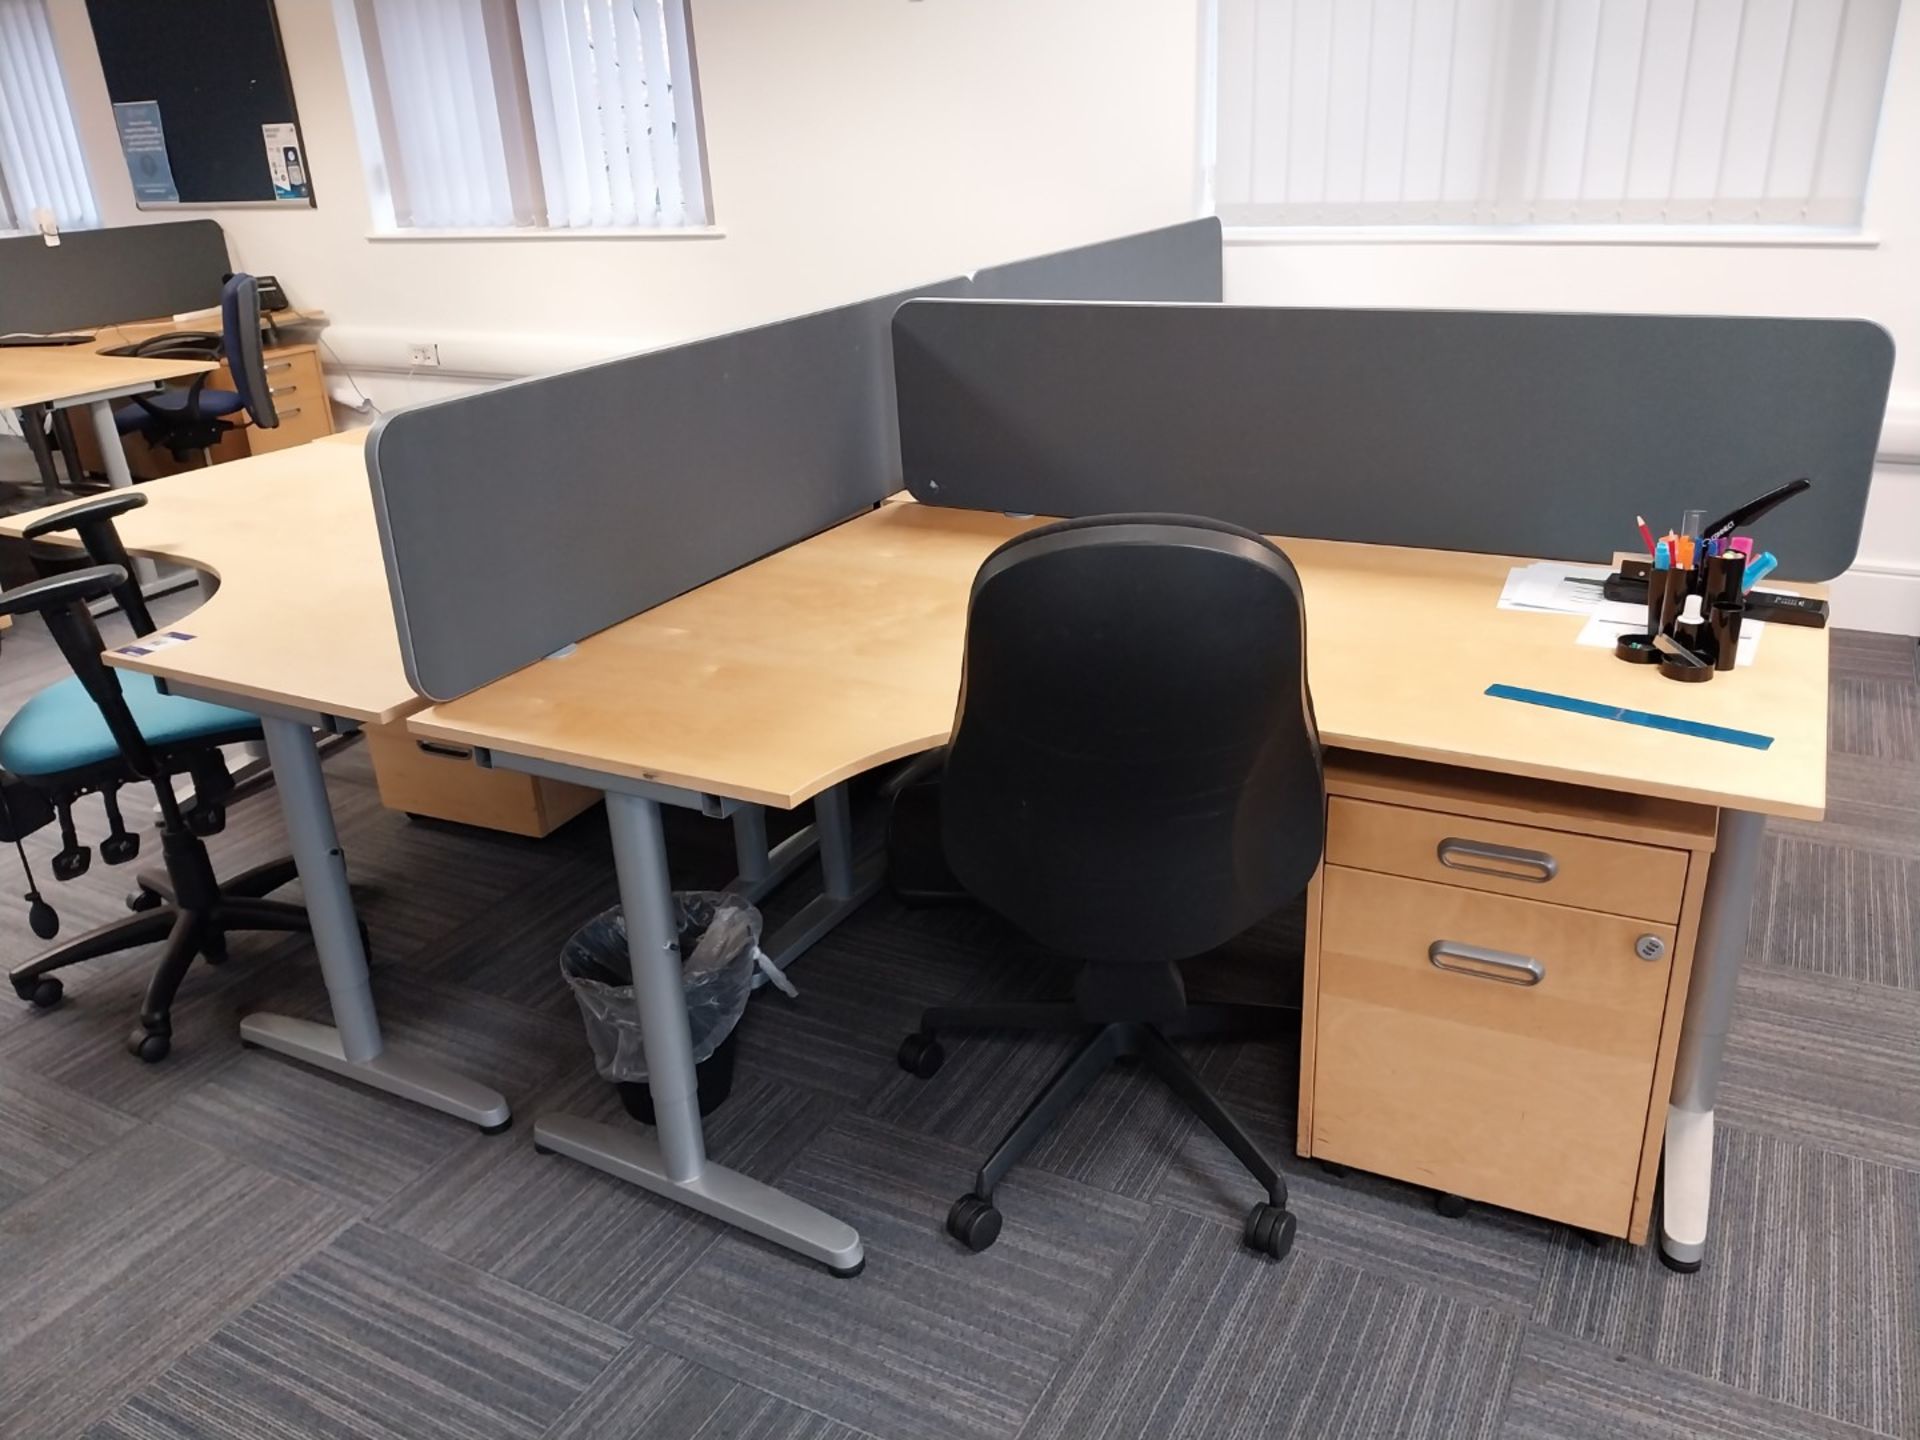 4 x curved office desks 1600mm(w) x 1200mm(d), 4 x - Image 2 of 4